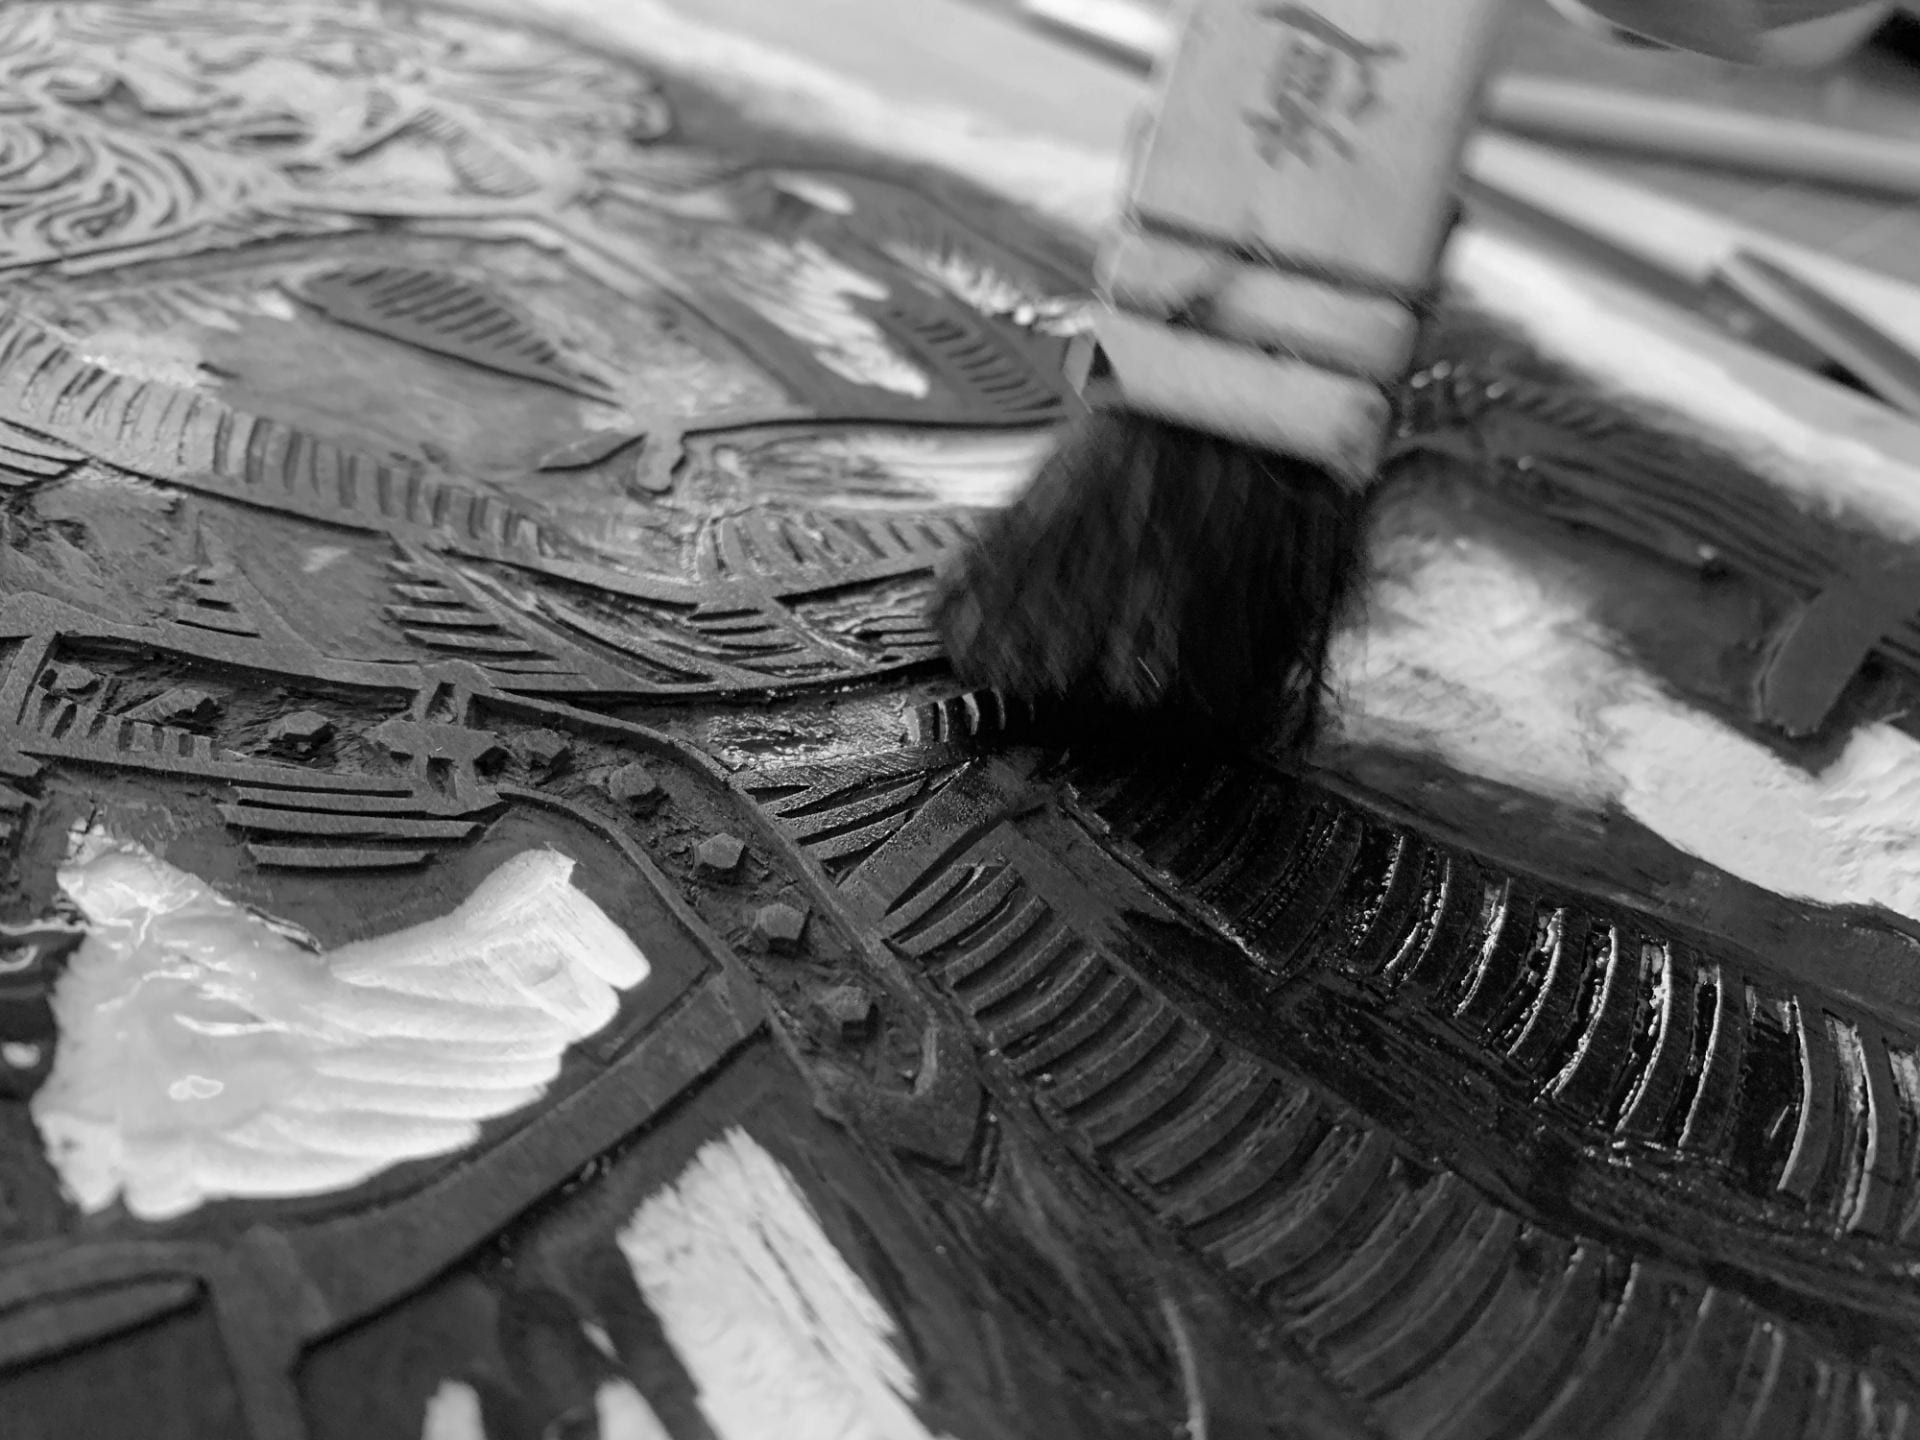 Close-up black and white image of a woodcut plate being inked up with a small brush.